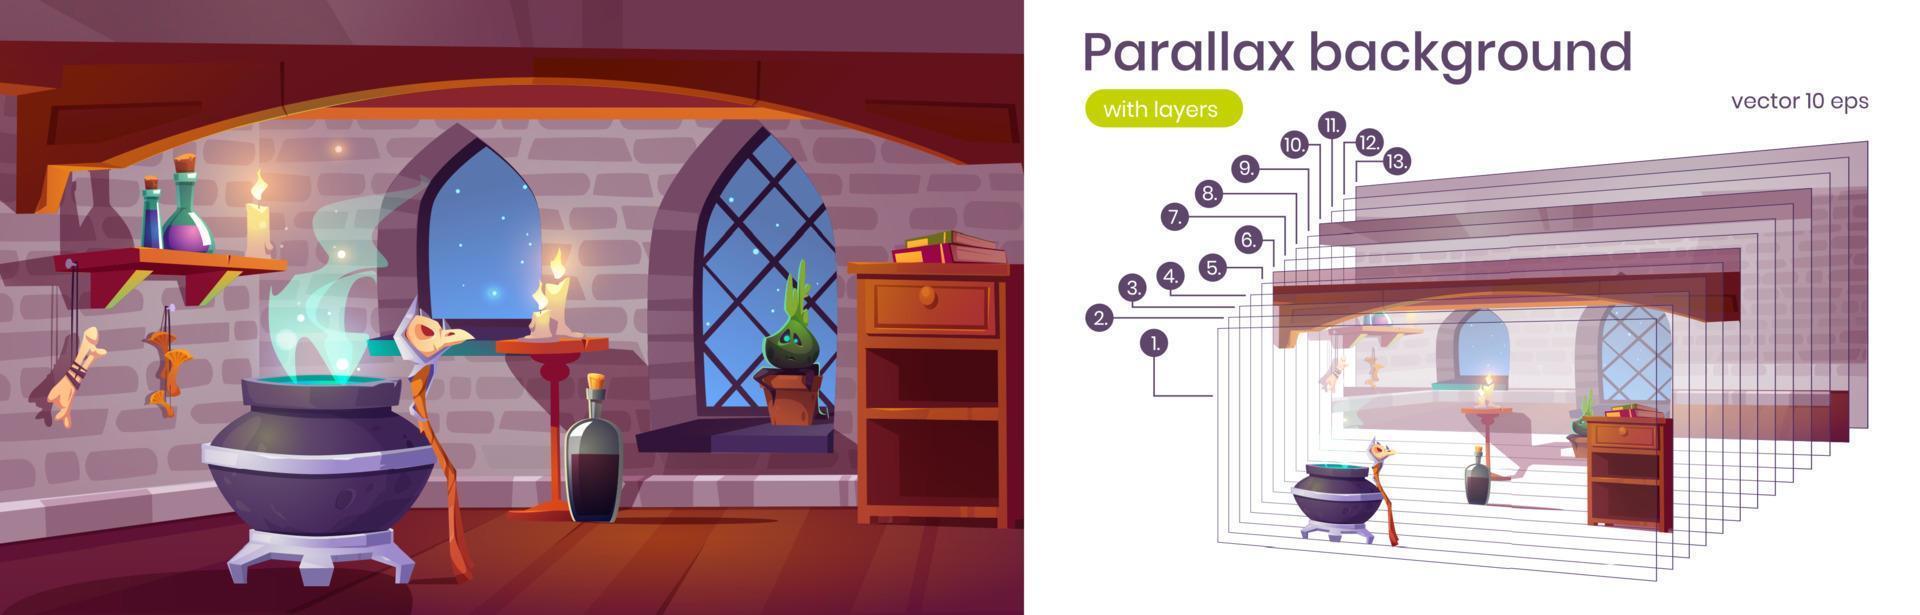 Parallax background with interior of witch house vector